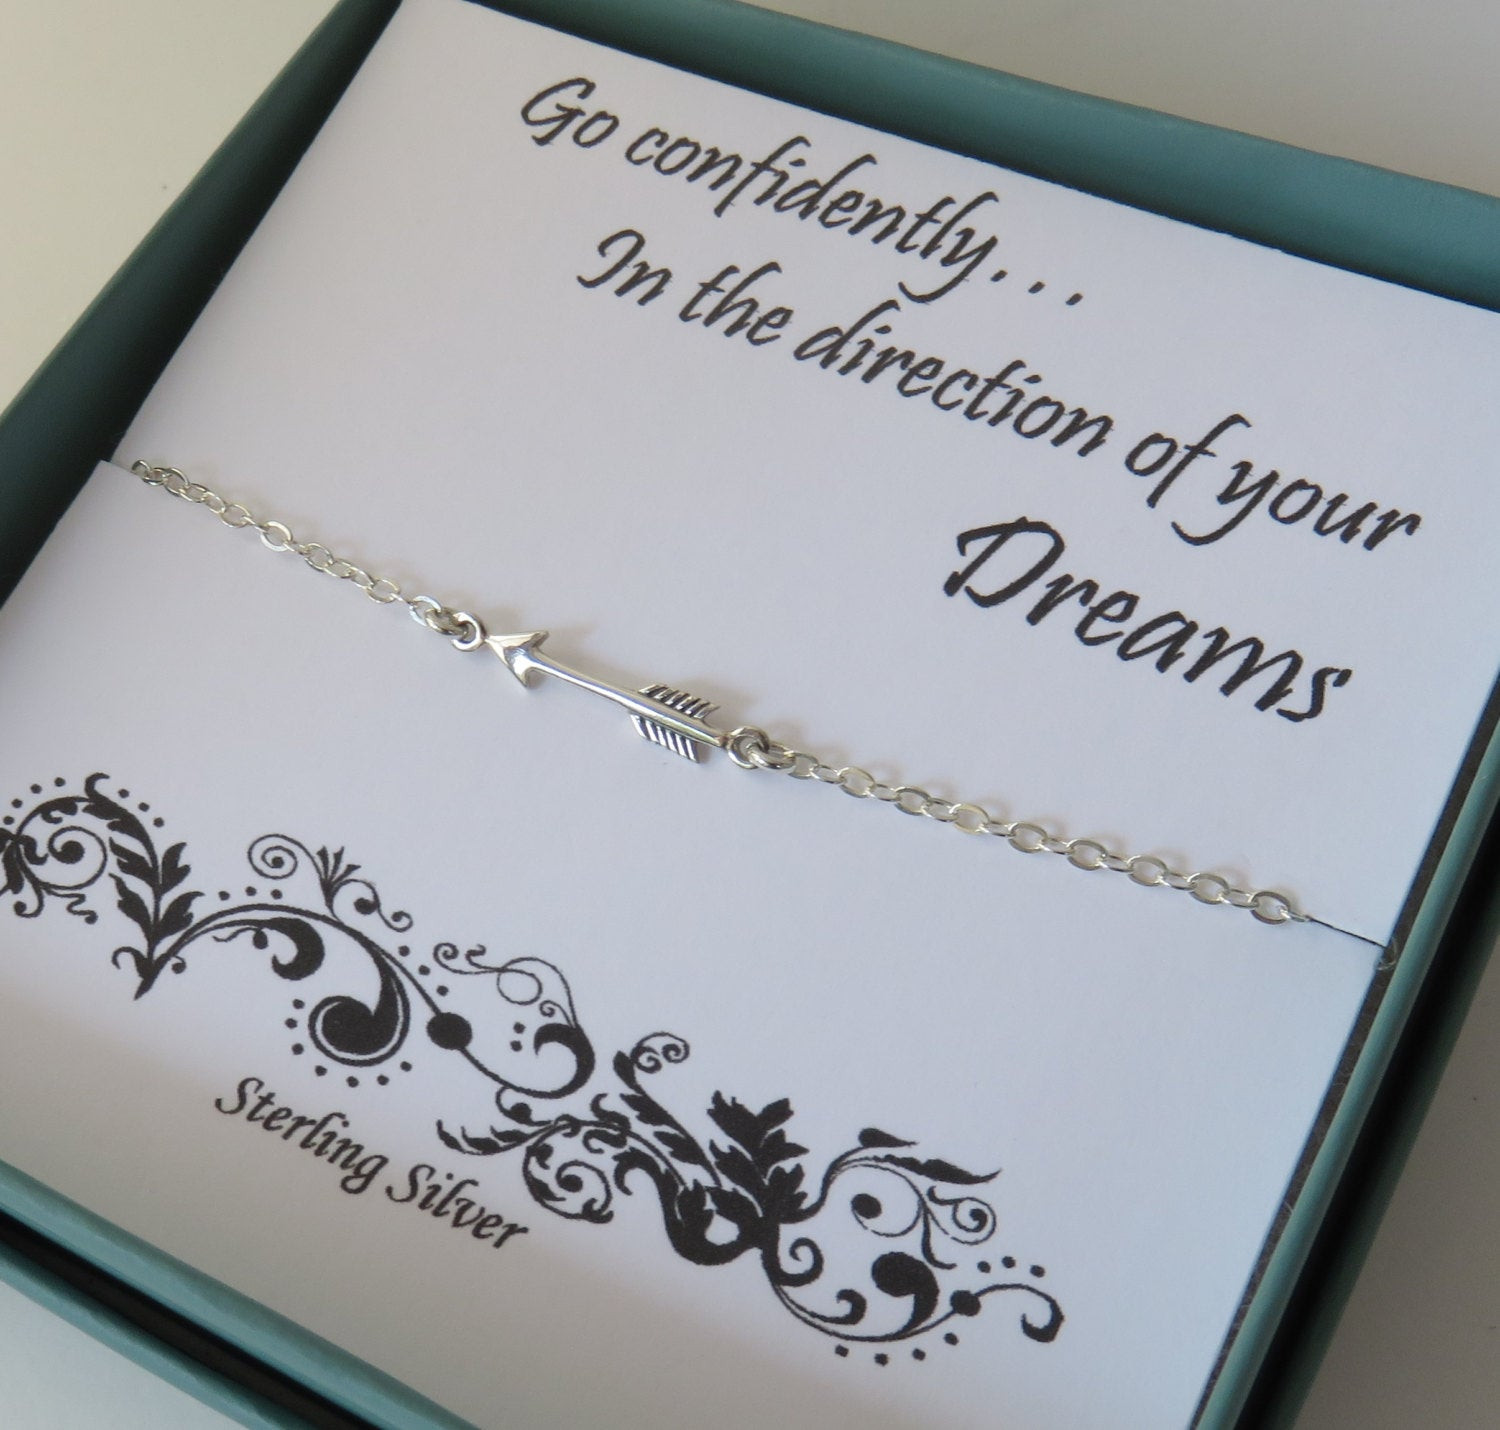 Graduation Jewelry Gift Ideas For Her
 Sterling Silver Arrow Necklace Graduation Gift for Her Arrow